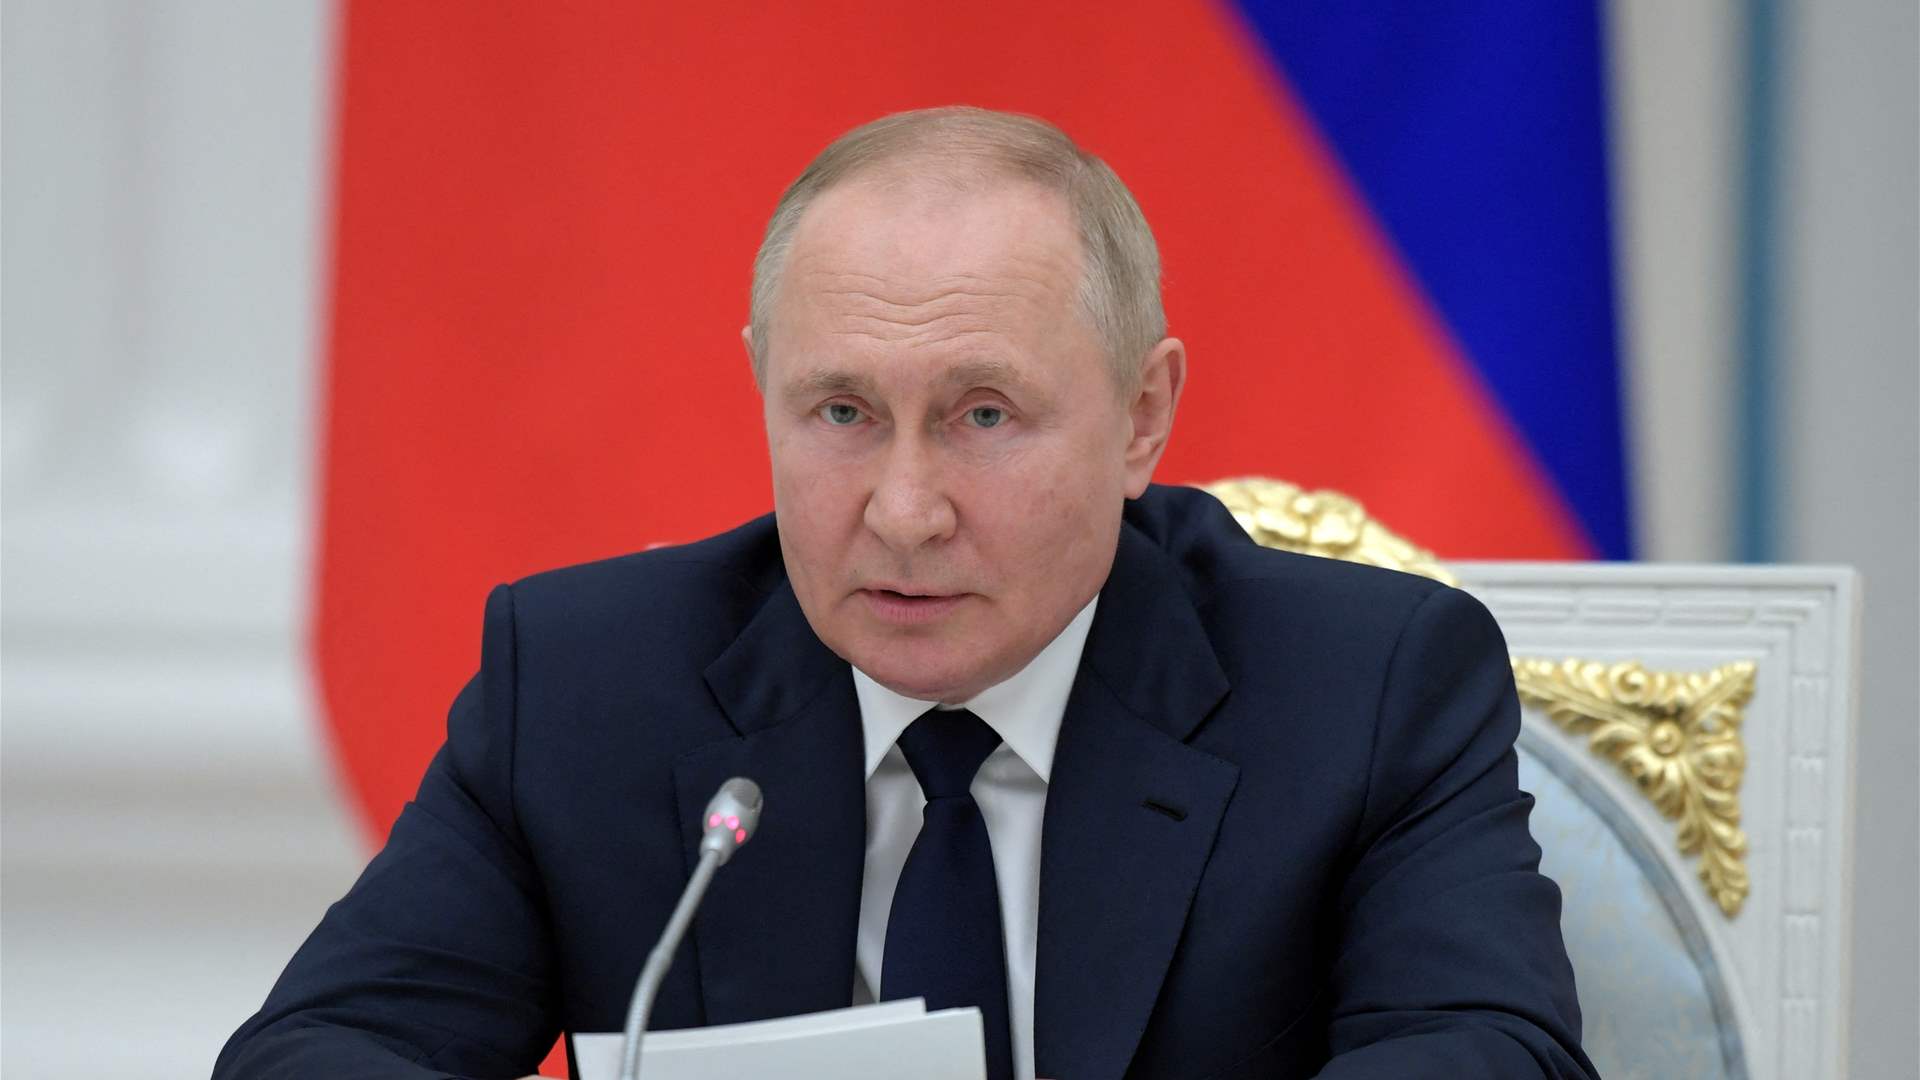 Putin to run for president again in 2024 elections